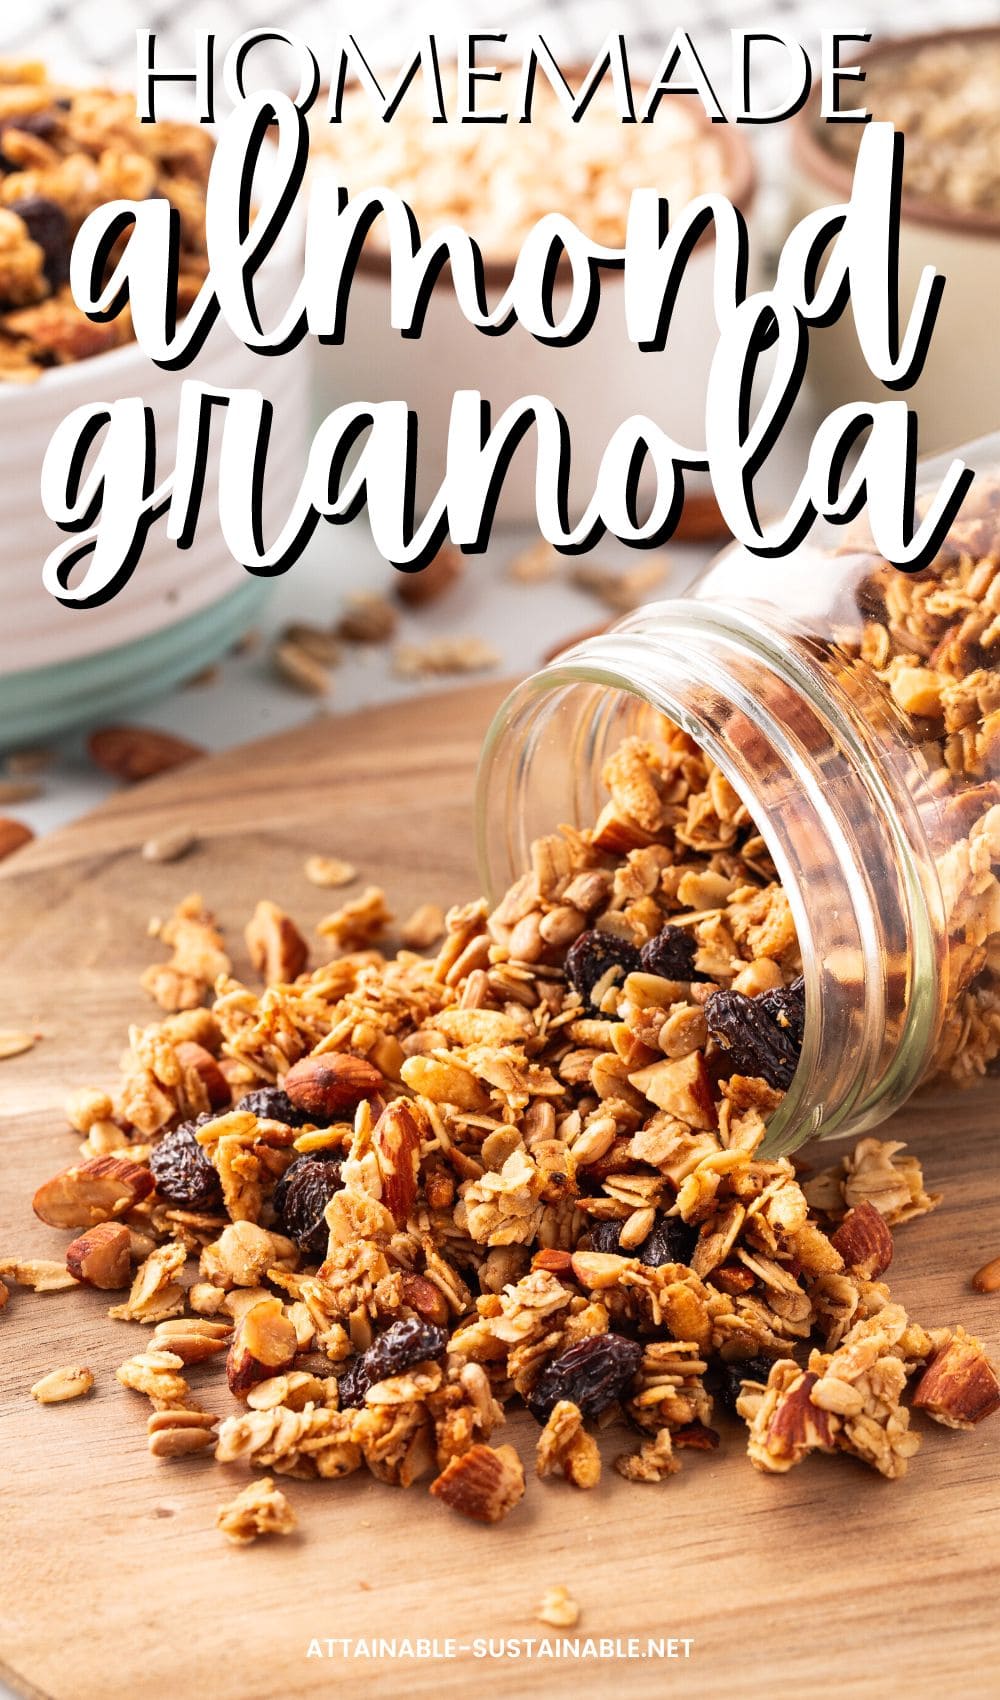 toasty brown granola in a glass jar on a wooden surface, some spilling out.